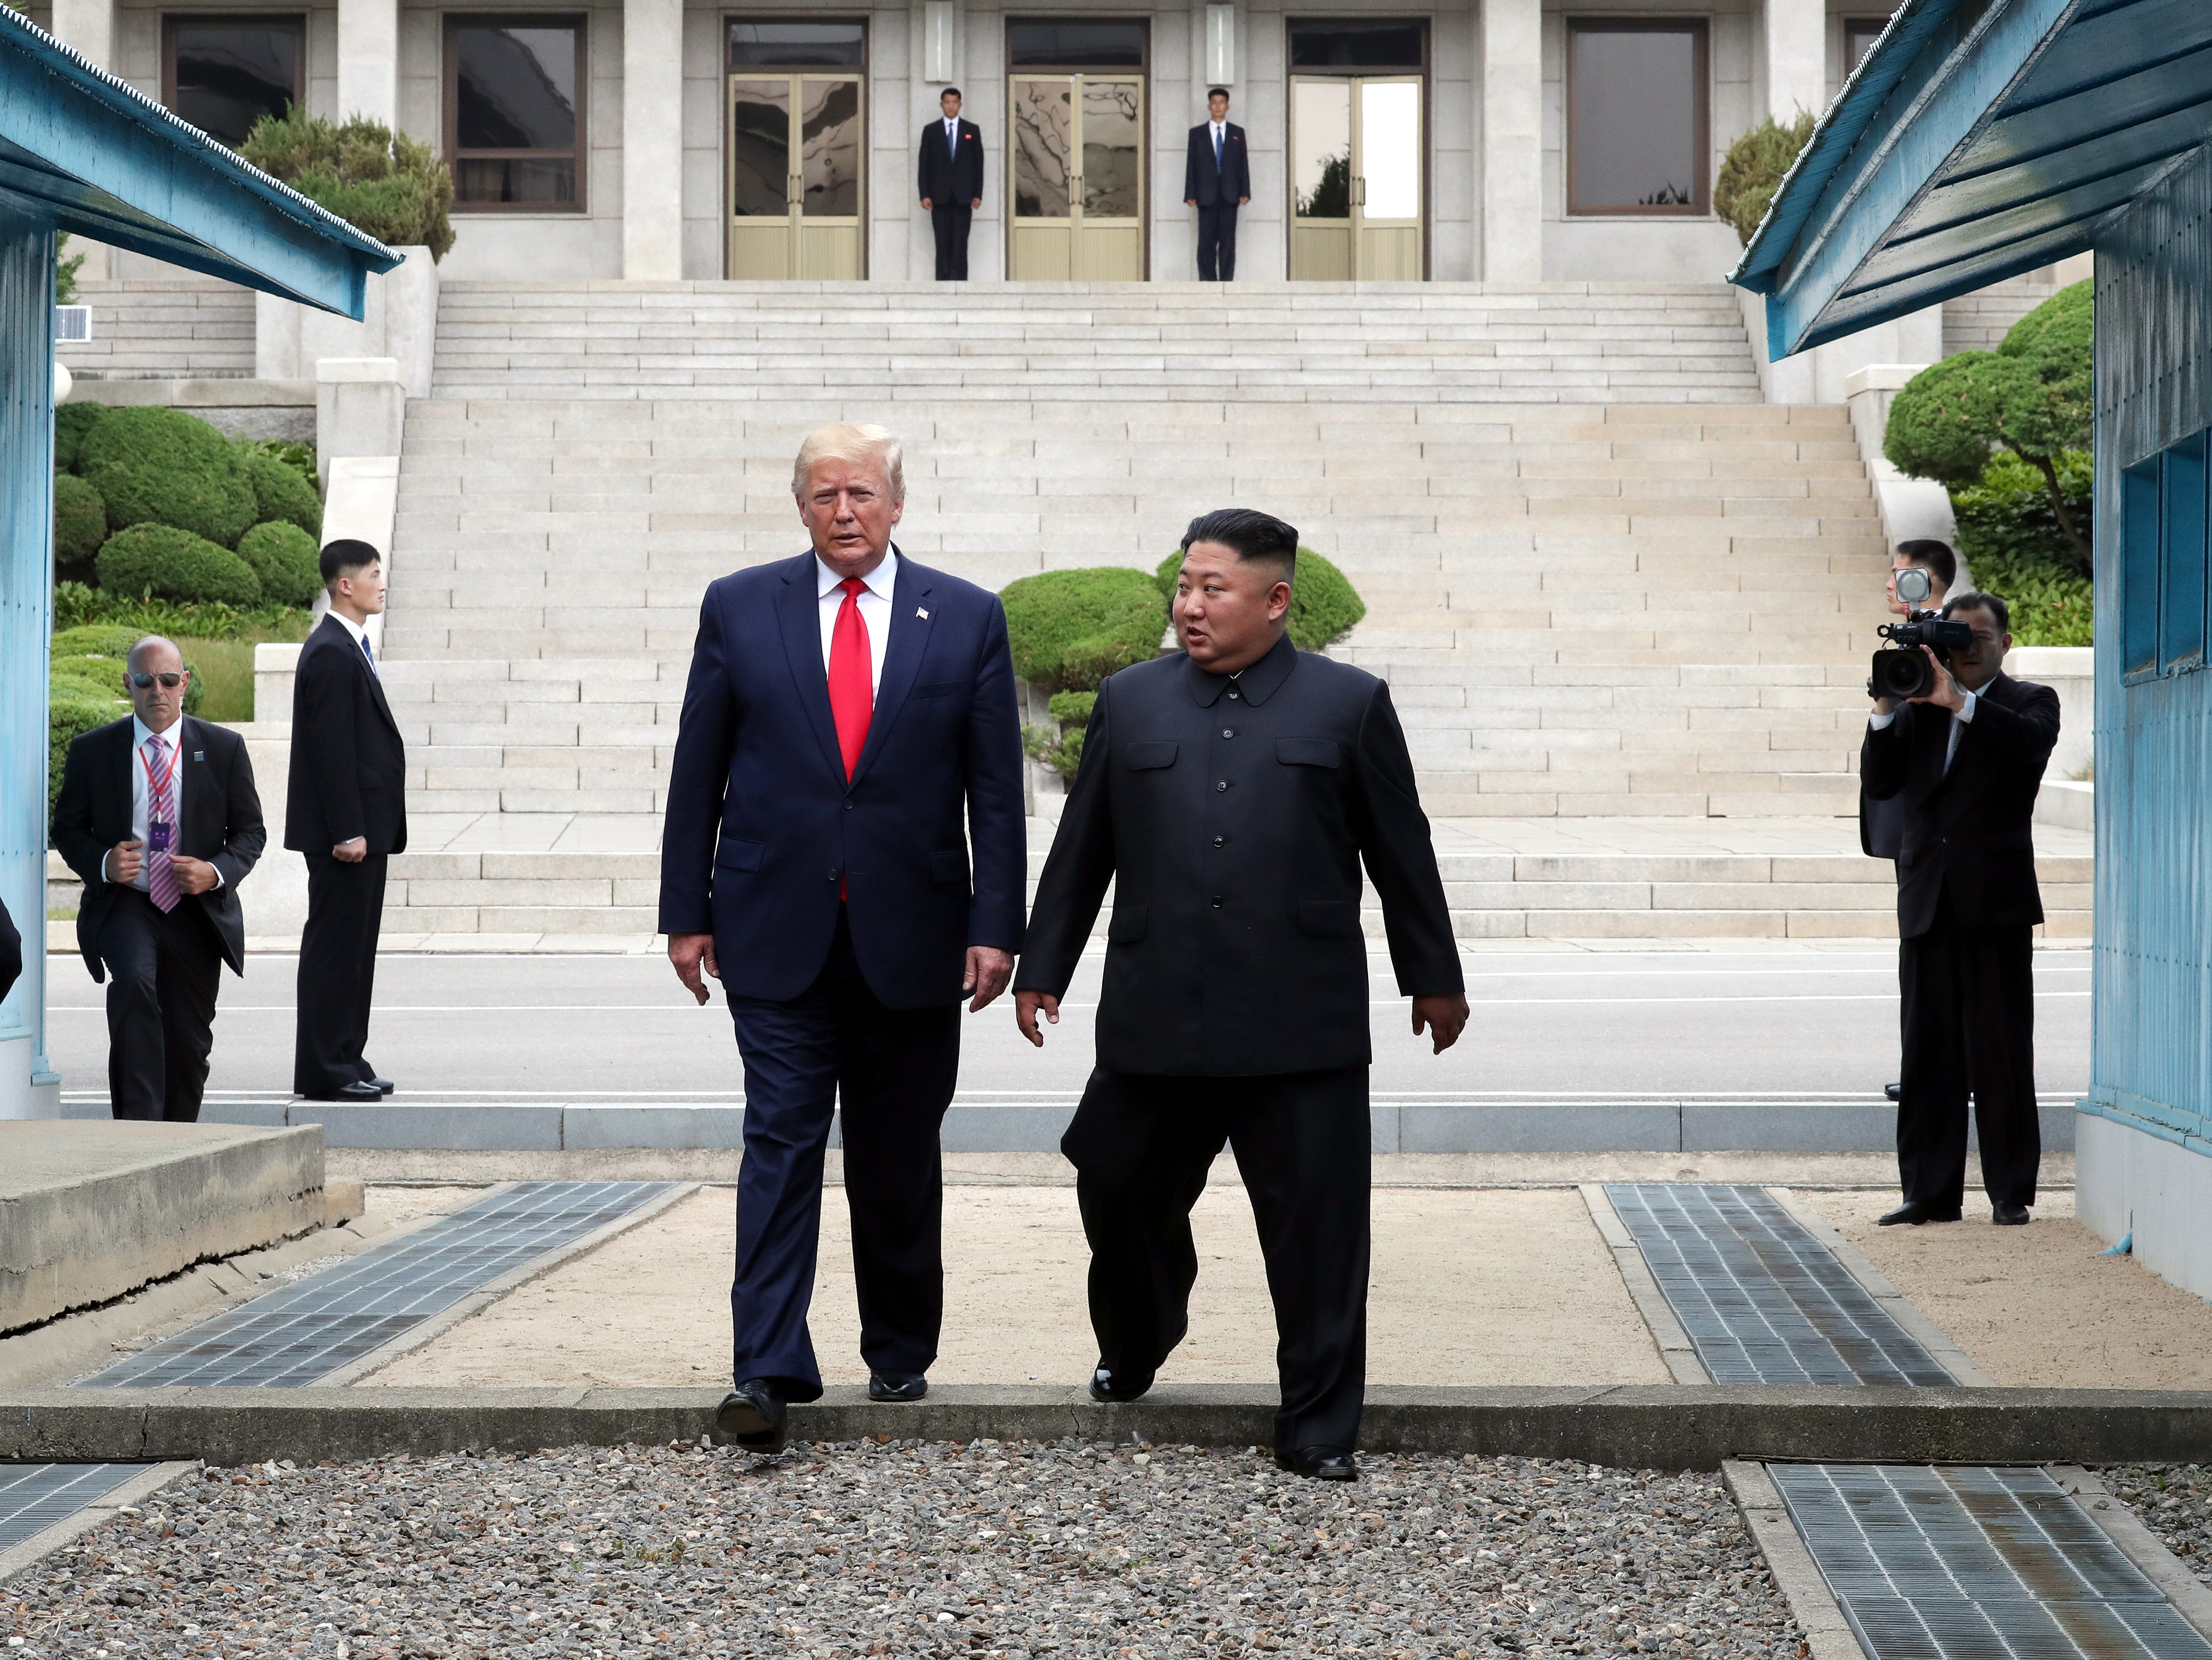 Trump becomes the first incumbent US president to enter North Korea in June 2019